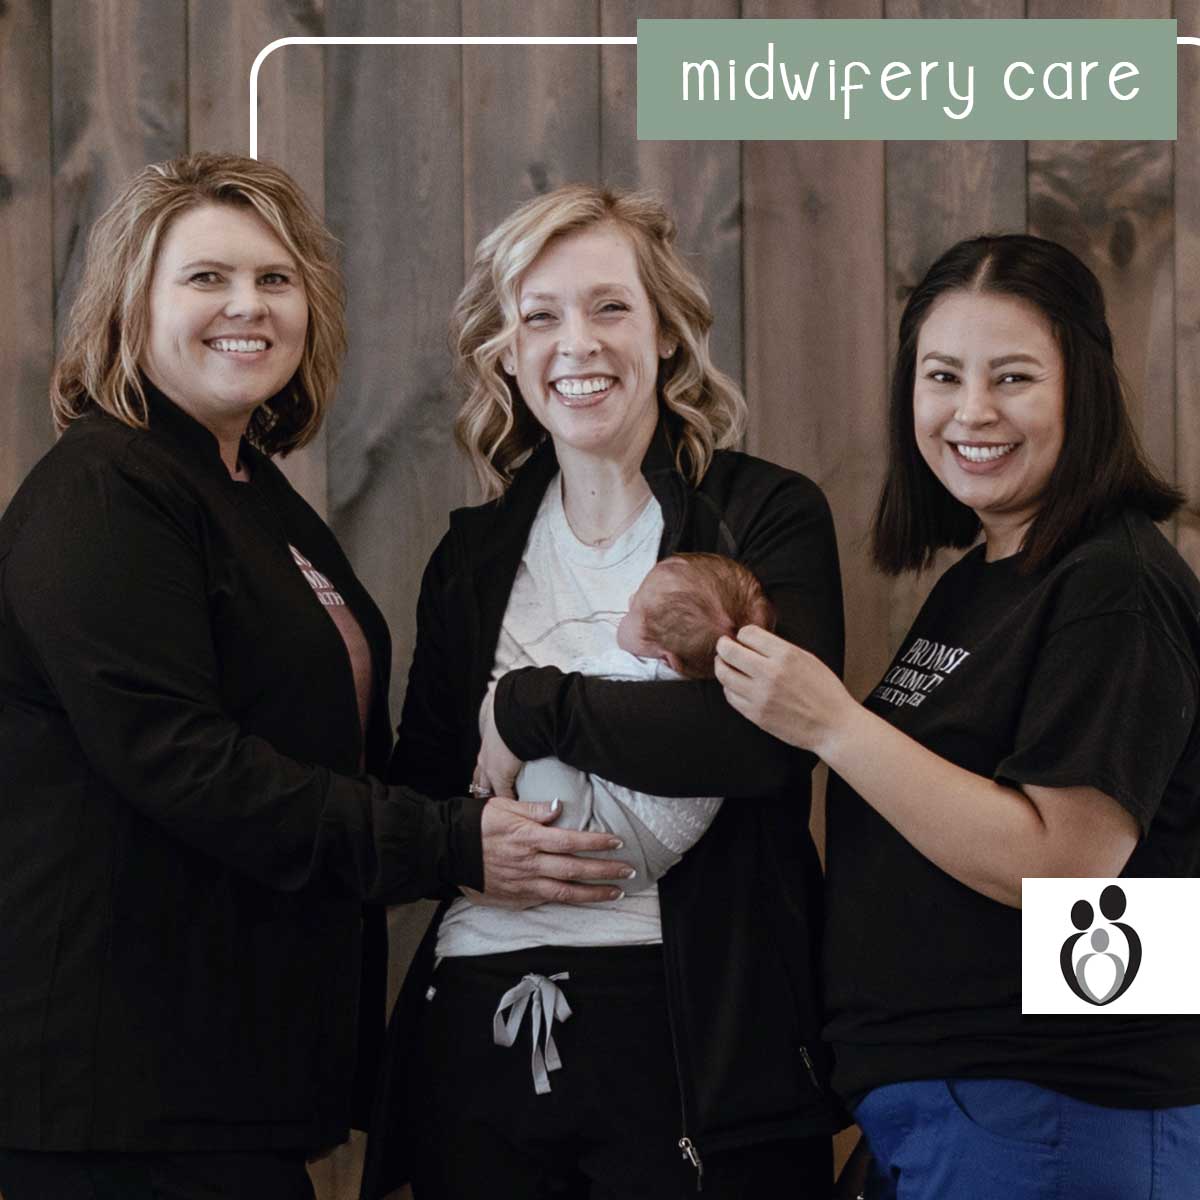 Midwife Audra Degroot, CNM, ARNP, in Sioux Center, IA | Promise Community Health Center in Sioux Center, Iowa | Midwives in northwest Iowa, Midwives in southeast South Dakota, Midwives in southwest Minnesota | Midwives in Sioux Falls South Dakota, Midwives in Beresford South Dakota, Midwives in Sioux City IA, Midwives in LeMars IA, Midwives in Worthington MN, Midwives in Iowa, Midwives in South Dakota, Midwives in Minnesota